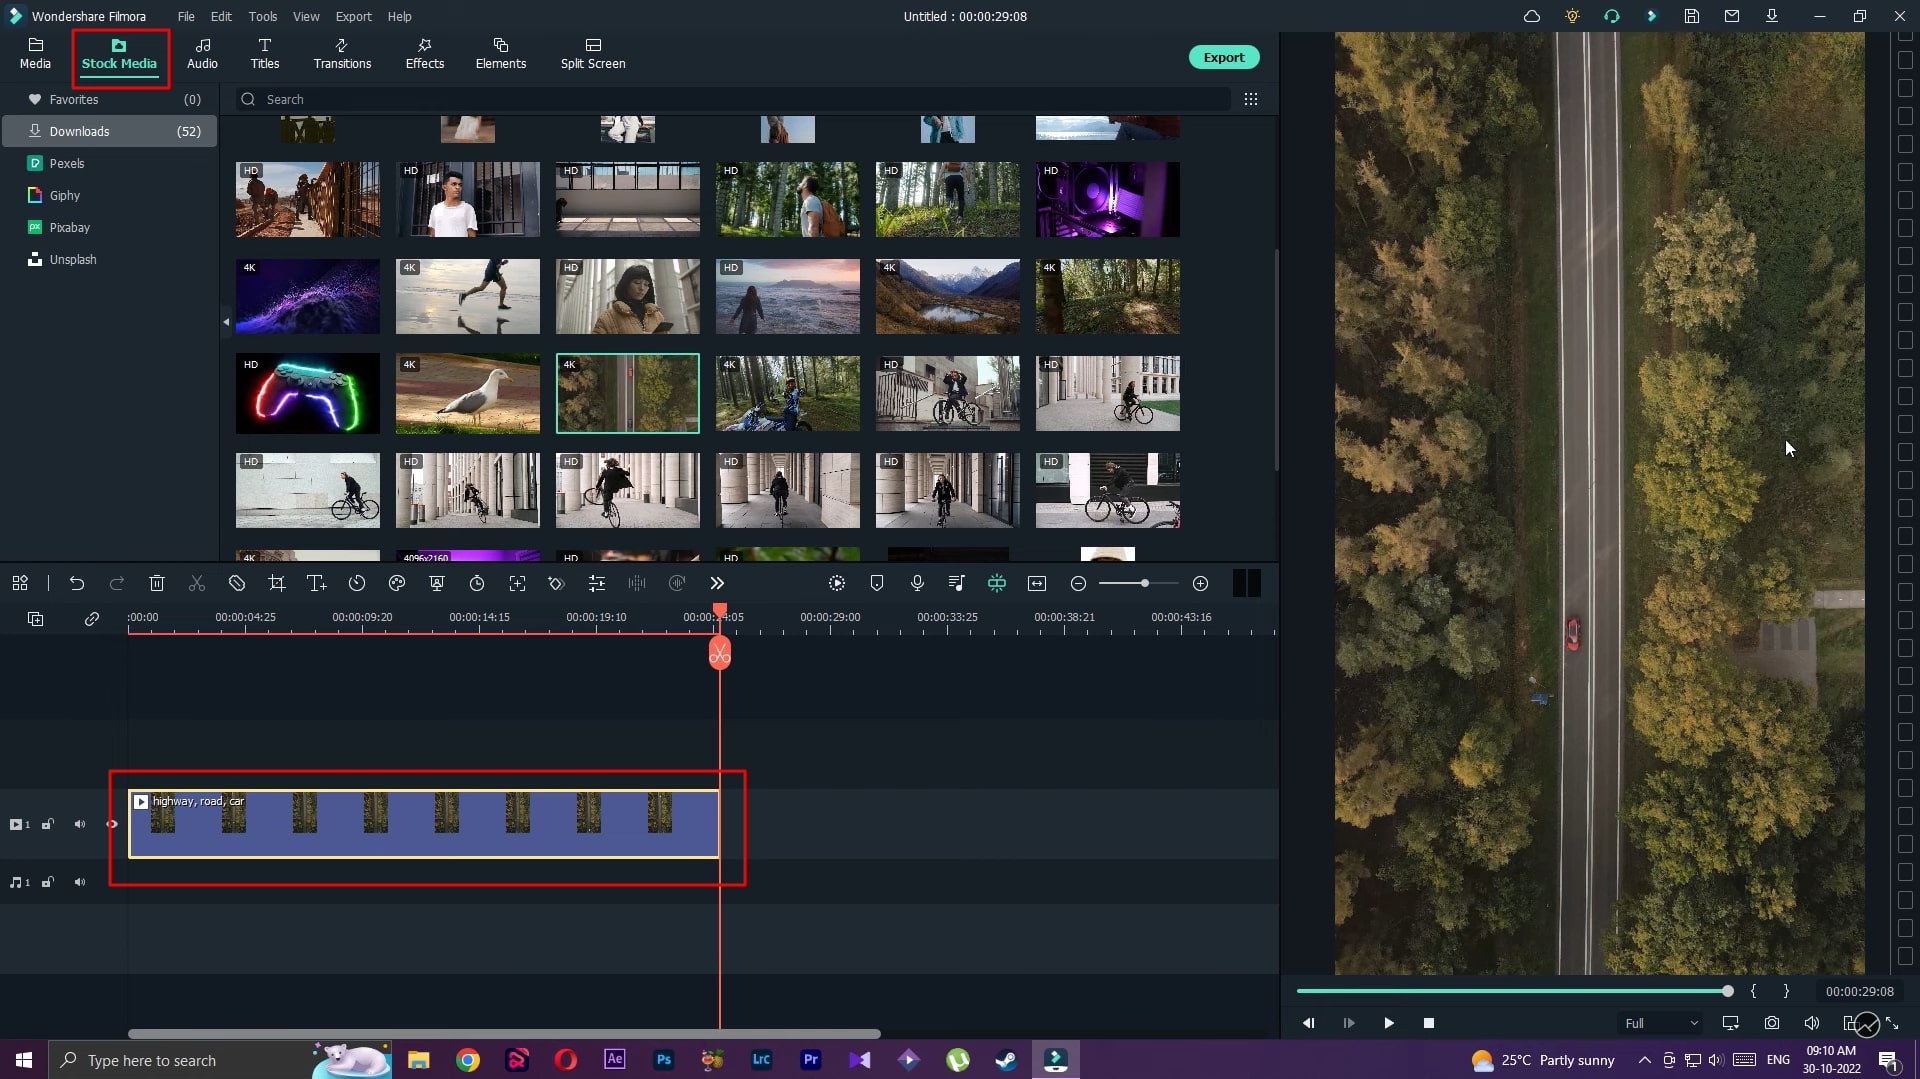 import and drag video to timeline